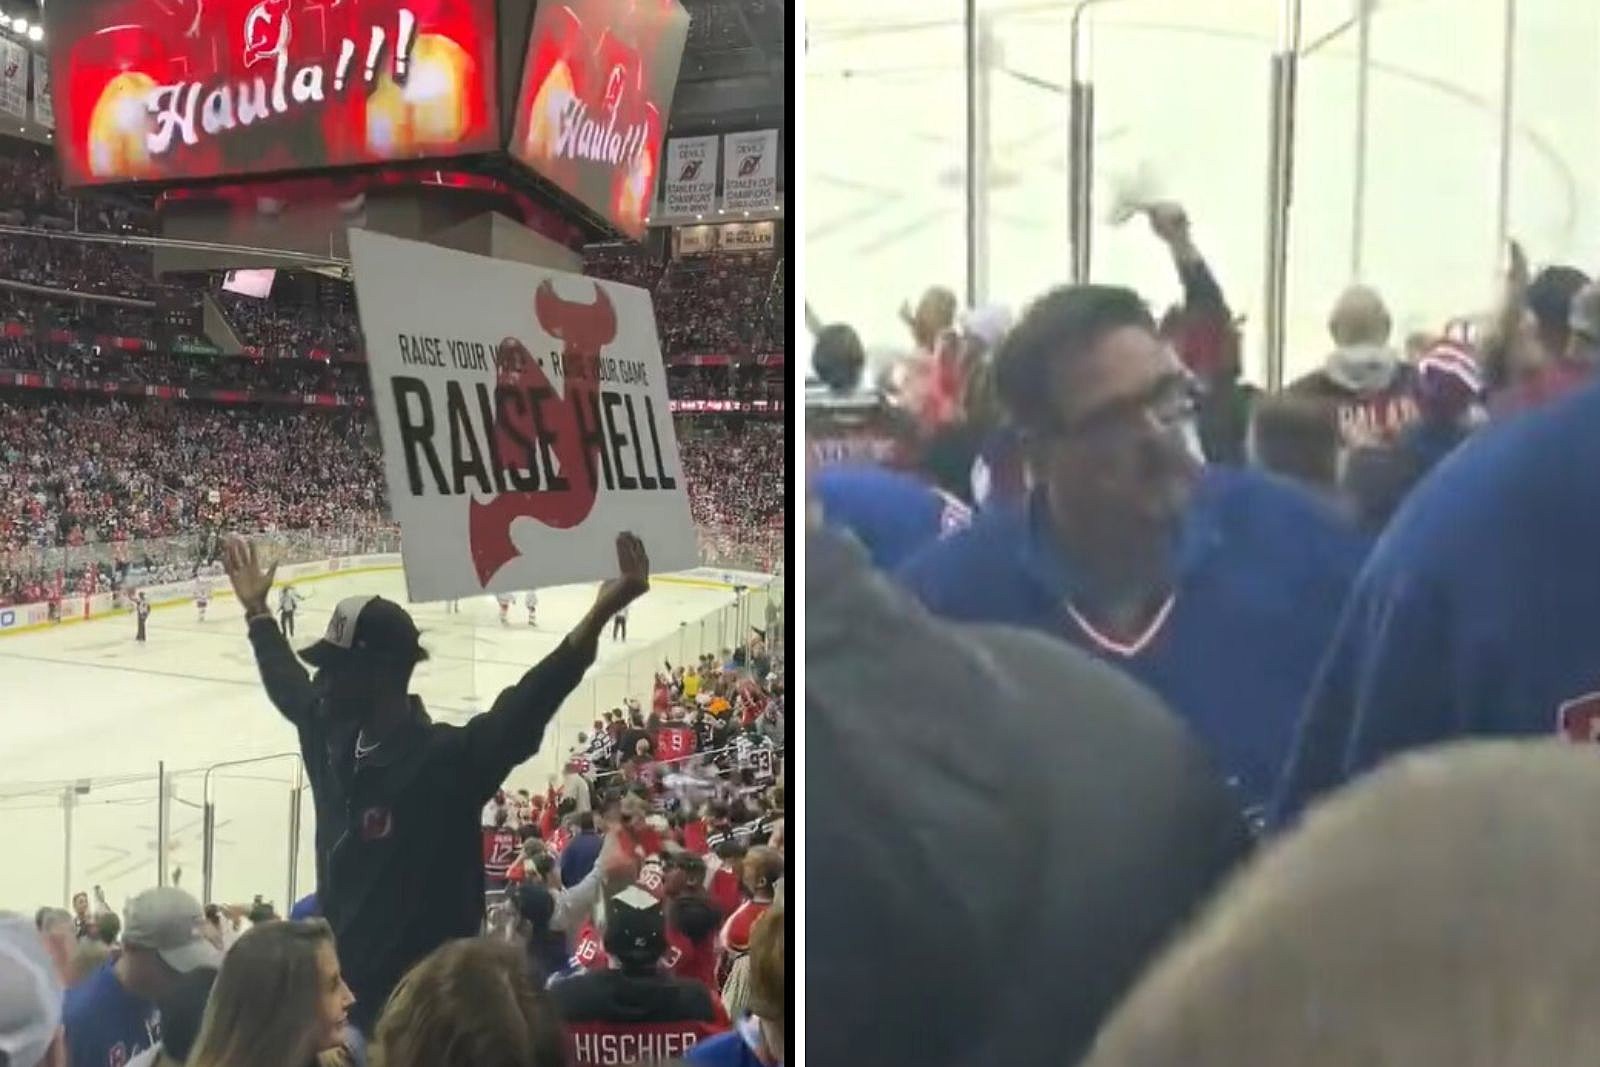 Devils searching for Rangers fan after video shows 'Woo Crew' member  sucker-punched during Game 7